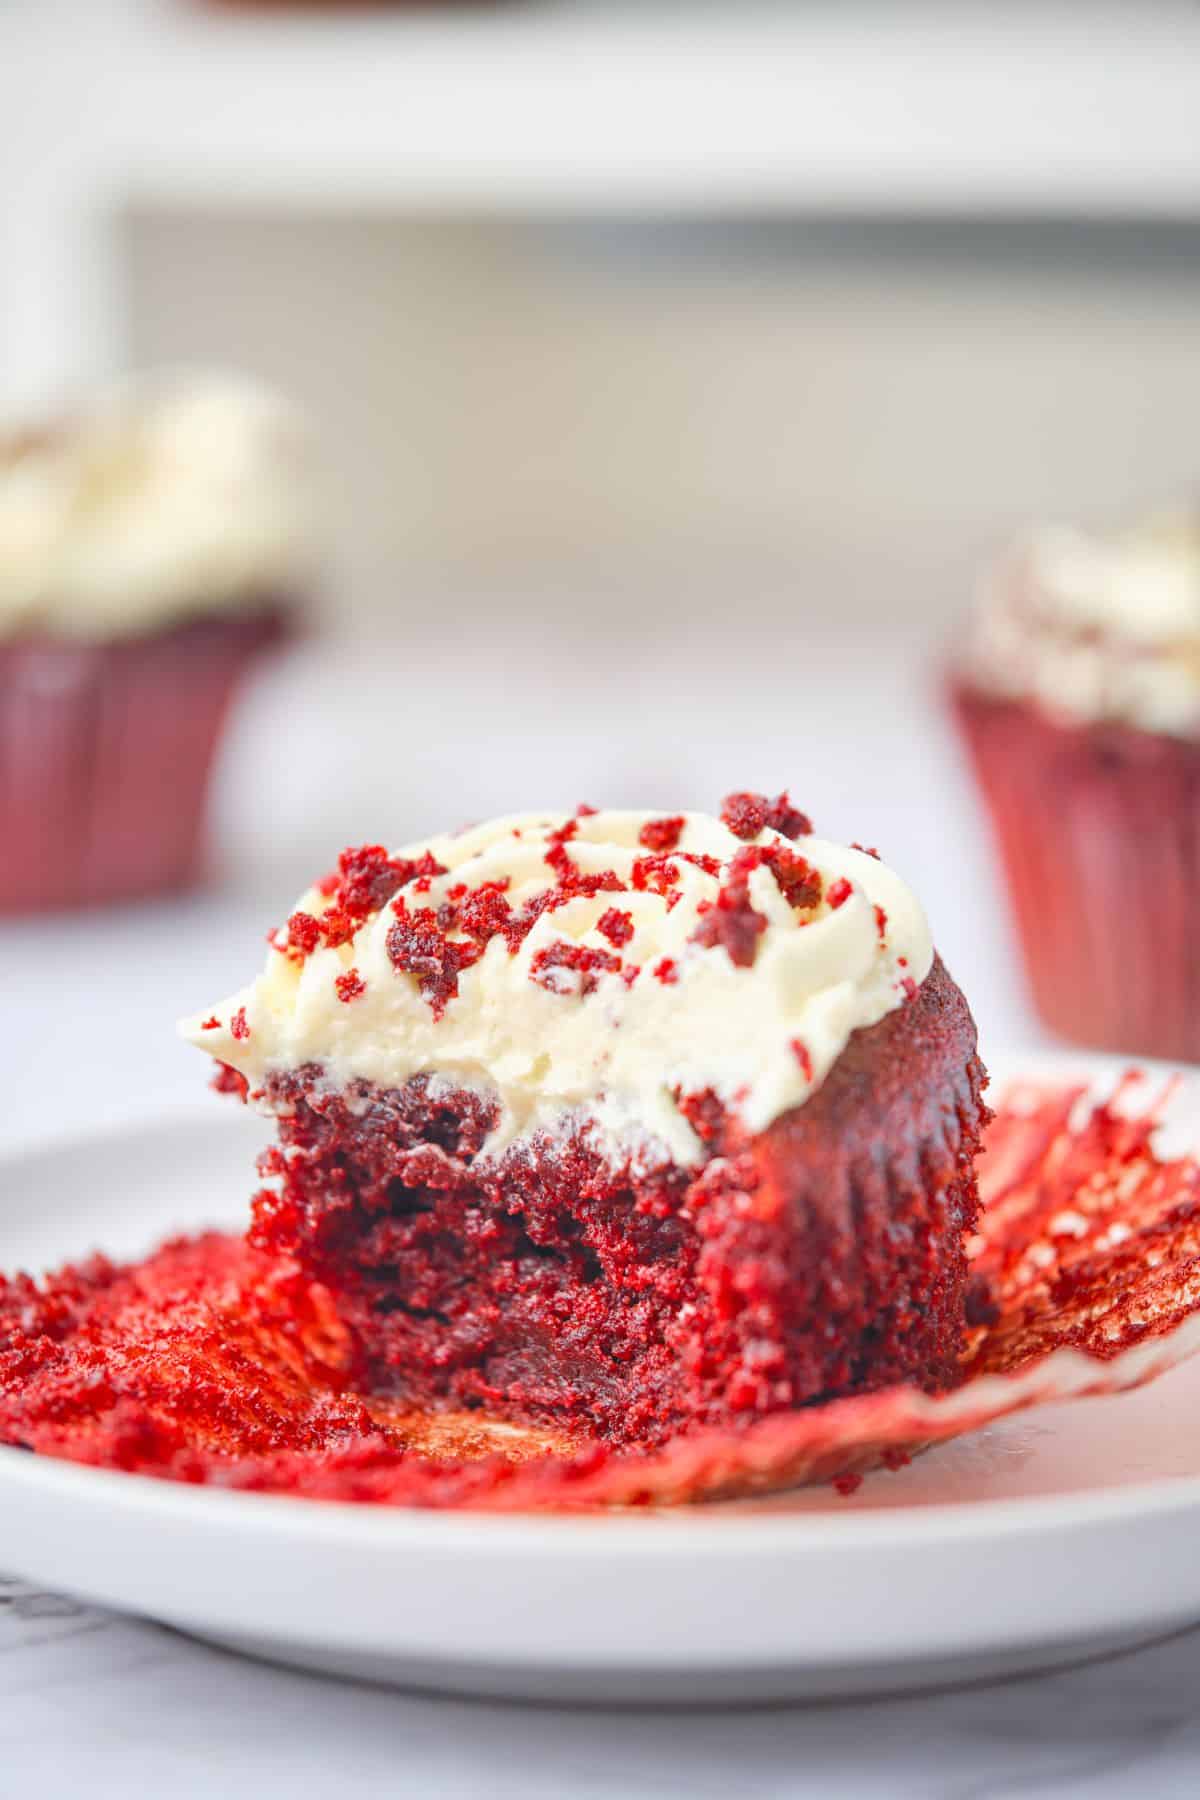 A red velvet cupcake cut open to show the soft inside.